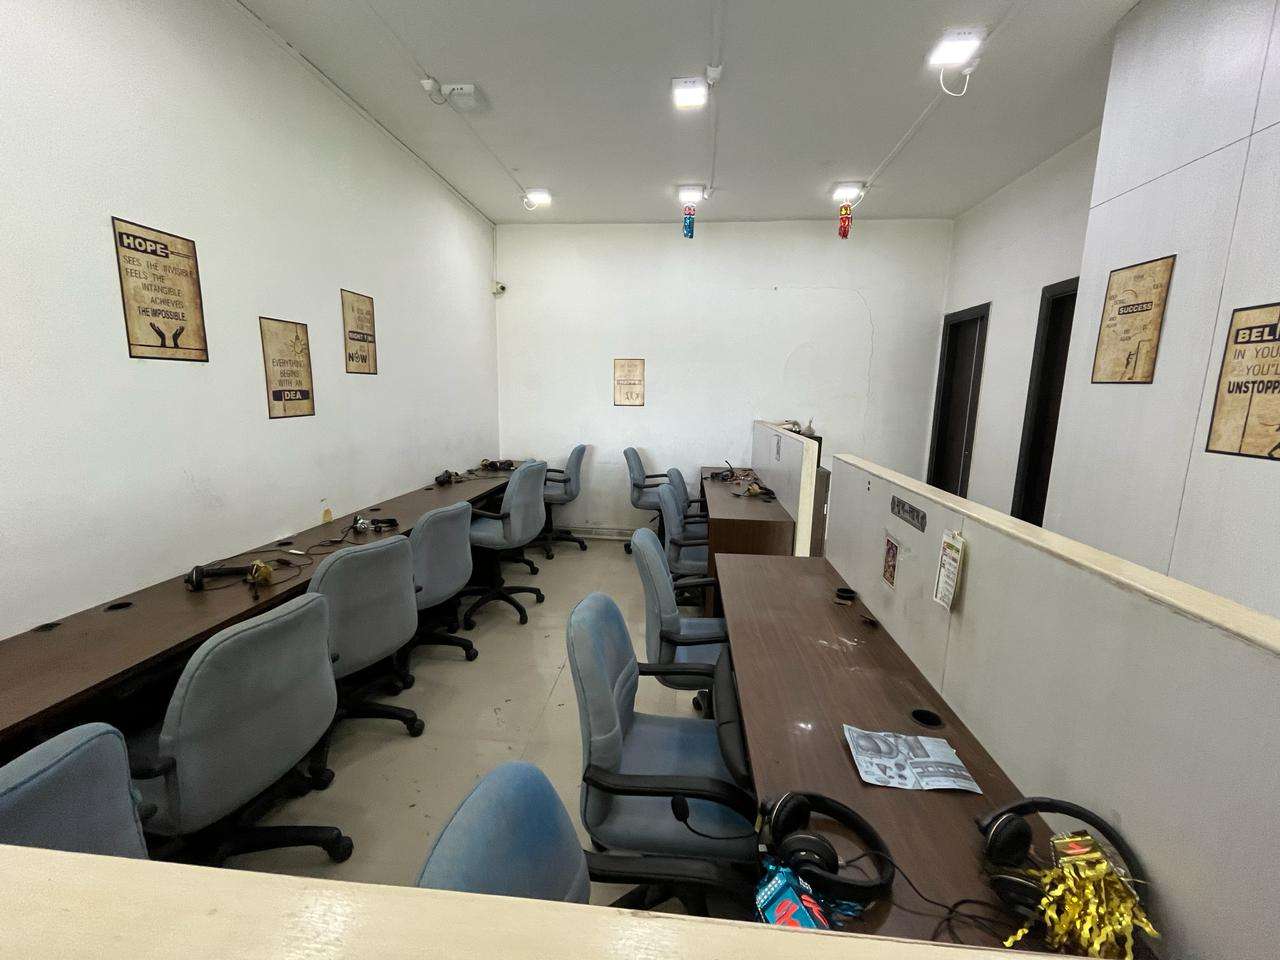 Commercial Office Space 1450 Sq.Ft. For Rent In Sakinaka Mumbai 6653275